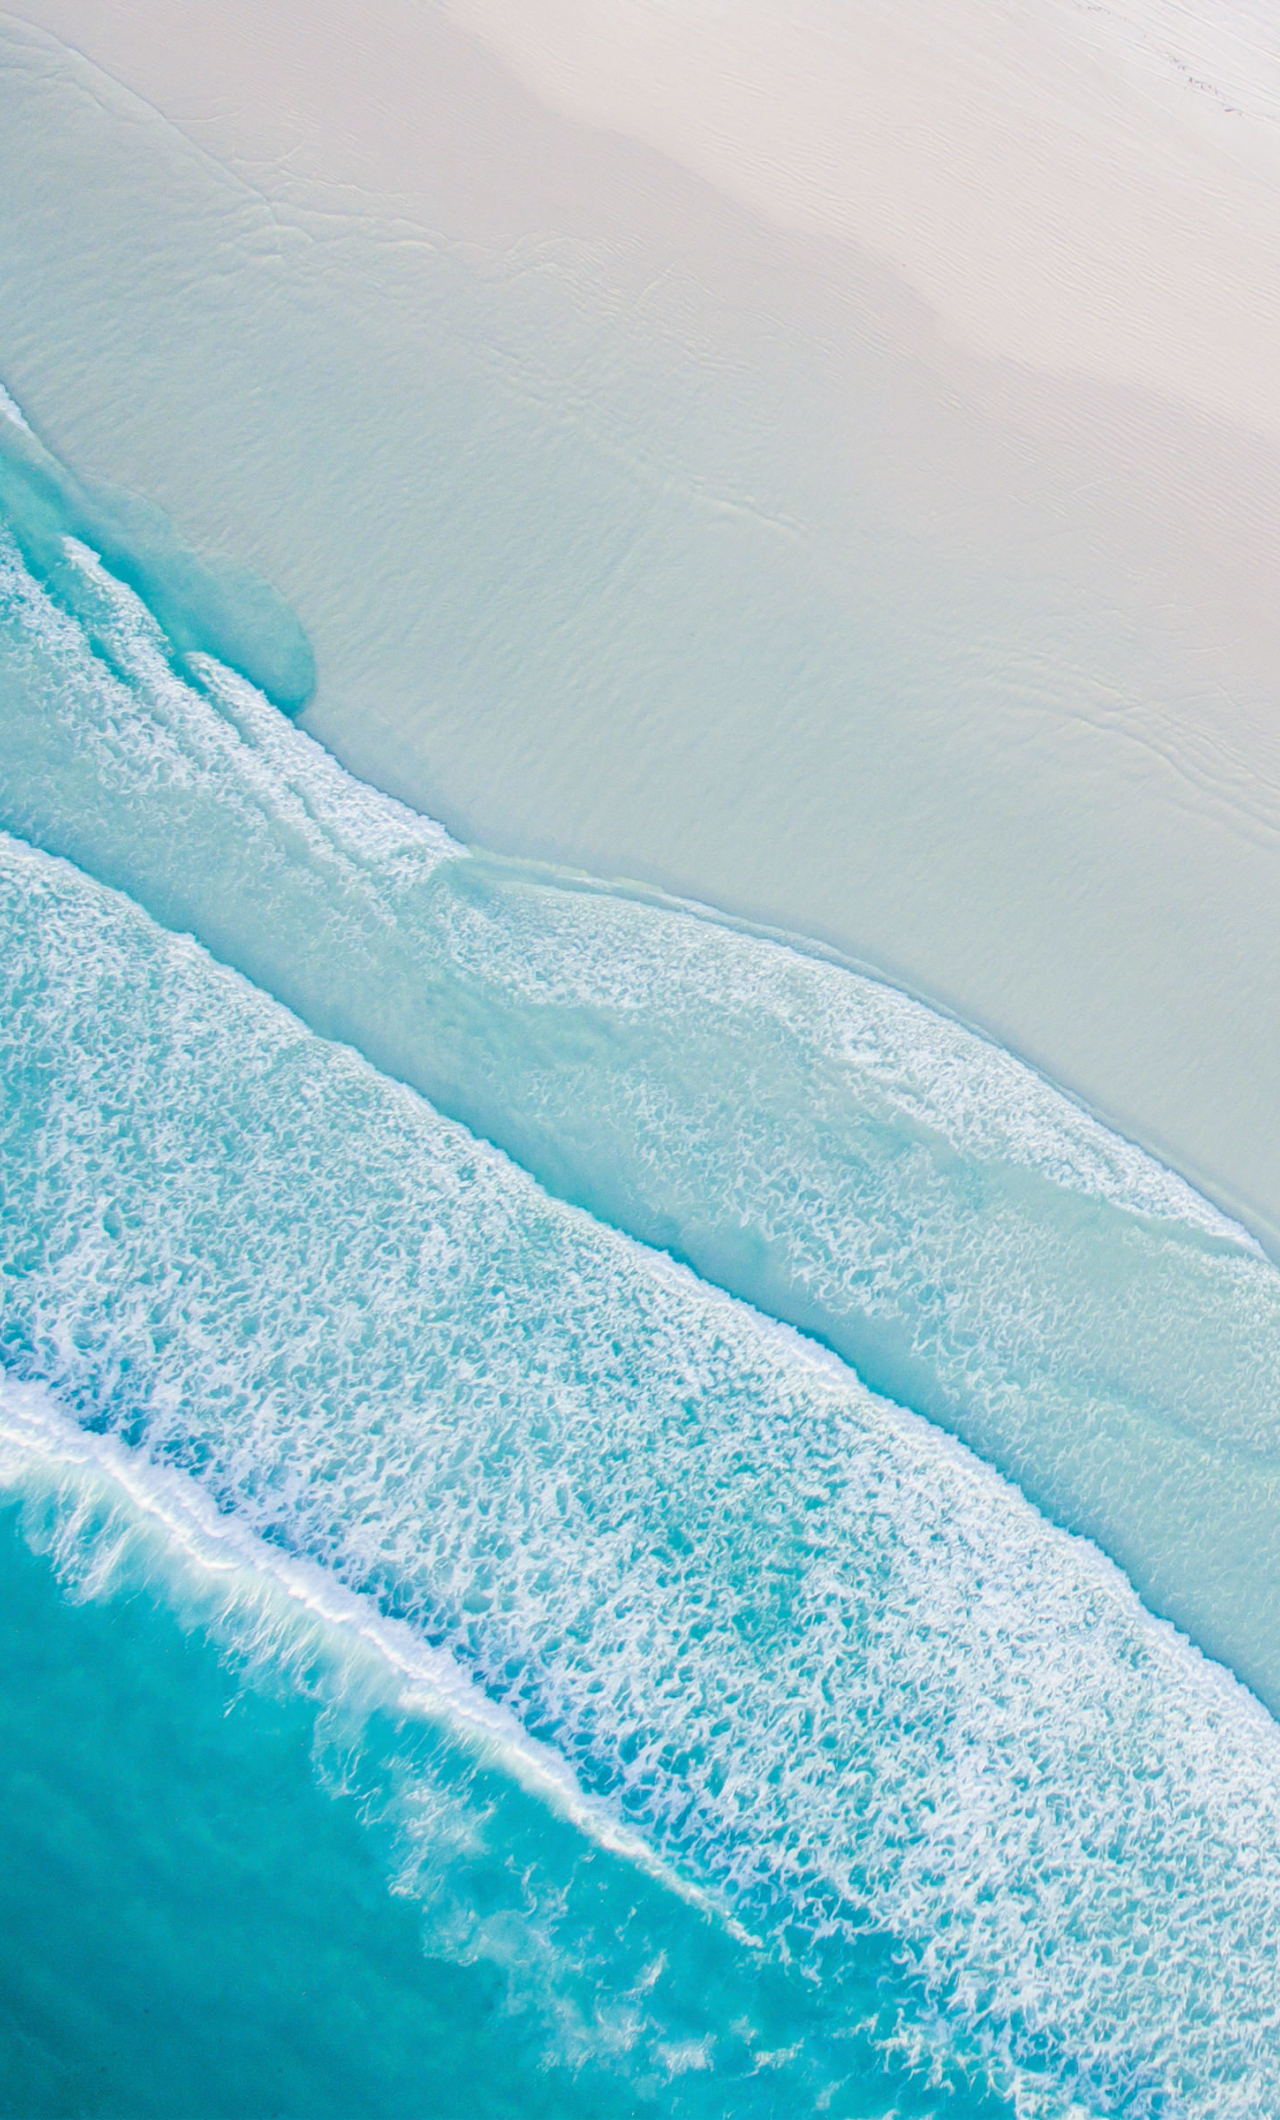 Download wallpaper 1280x2120 beach, aerial view, soft, stock, iphone 6